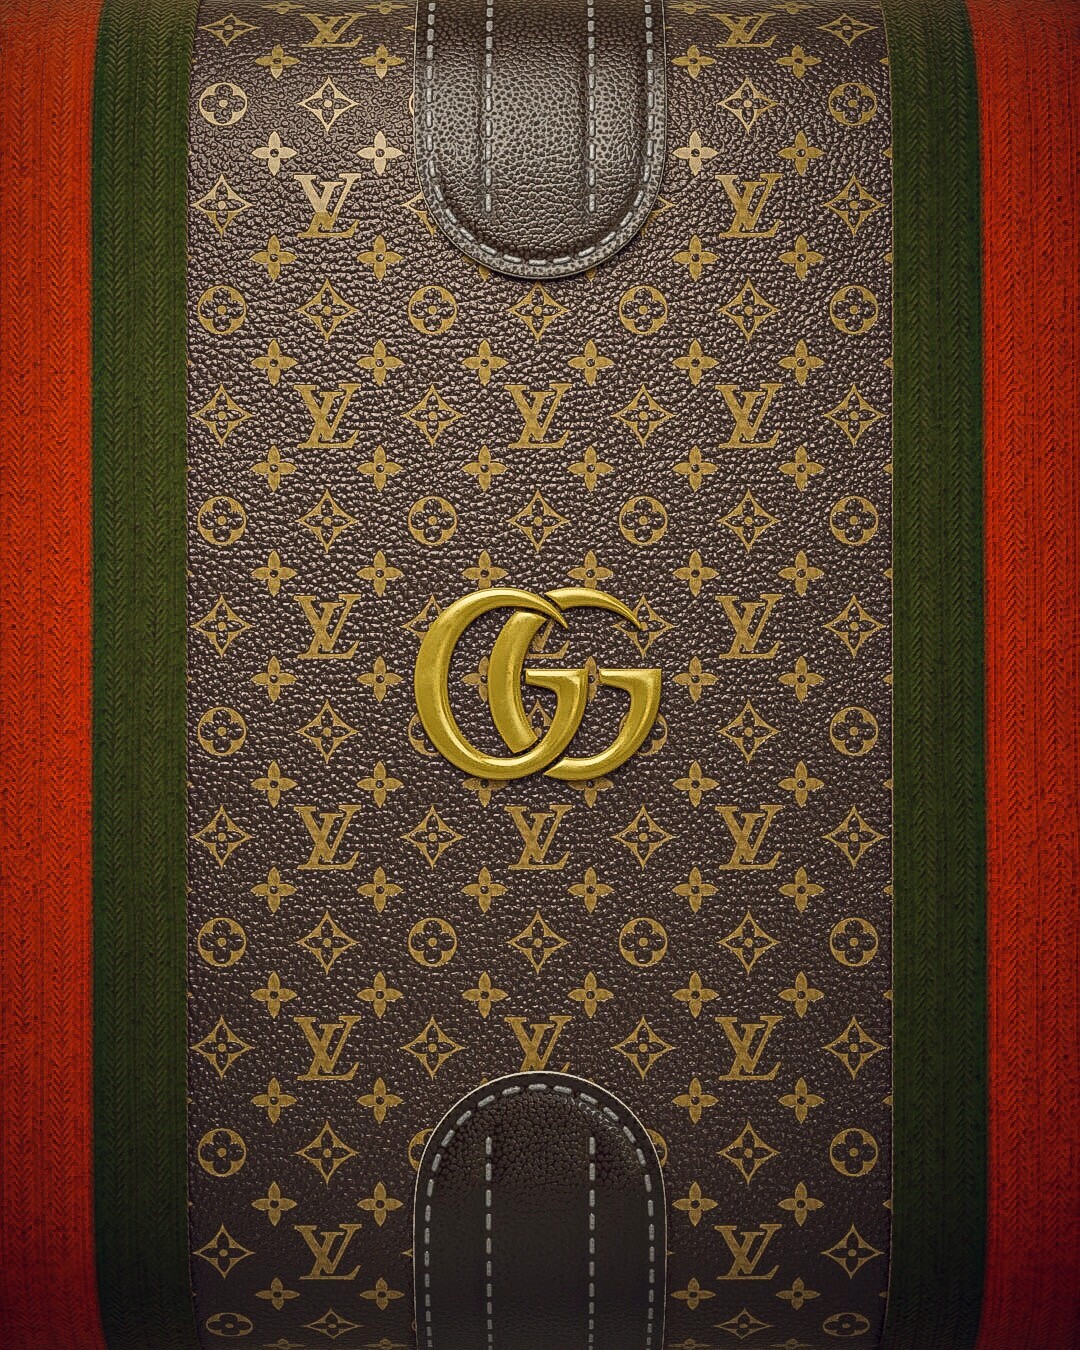 is gucci better than louis vuitton